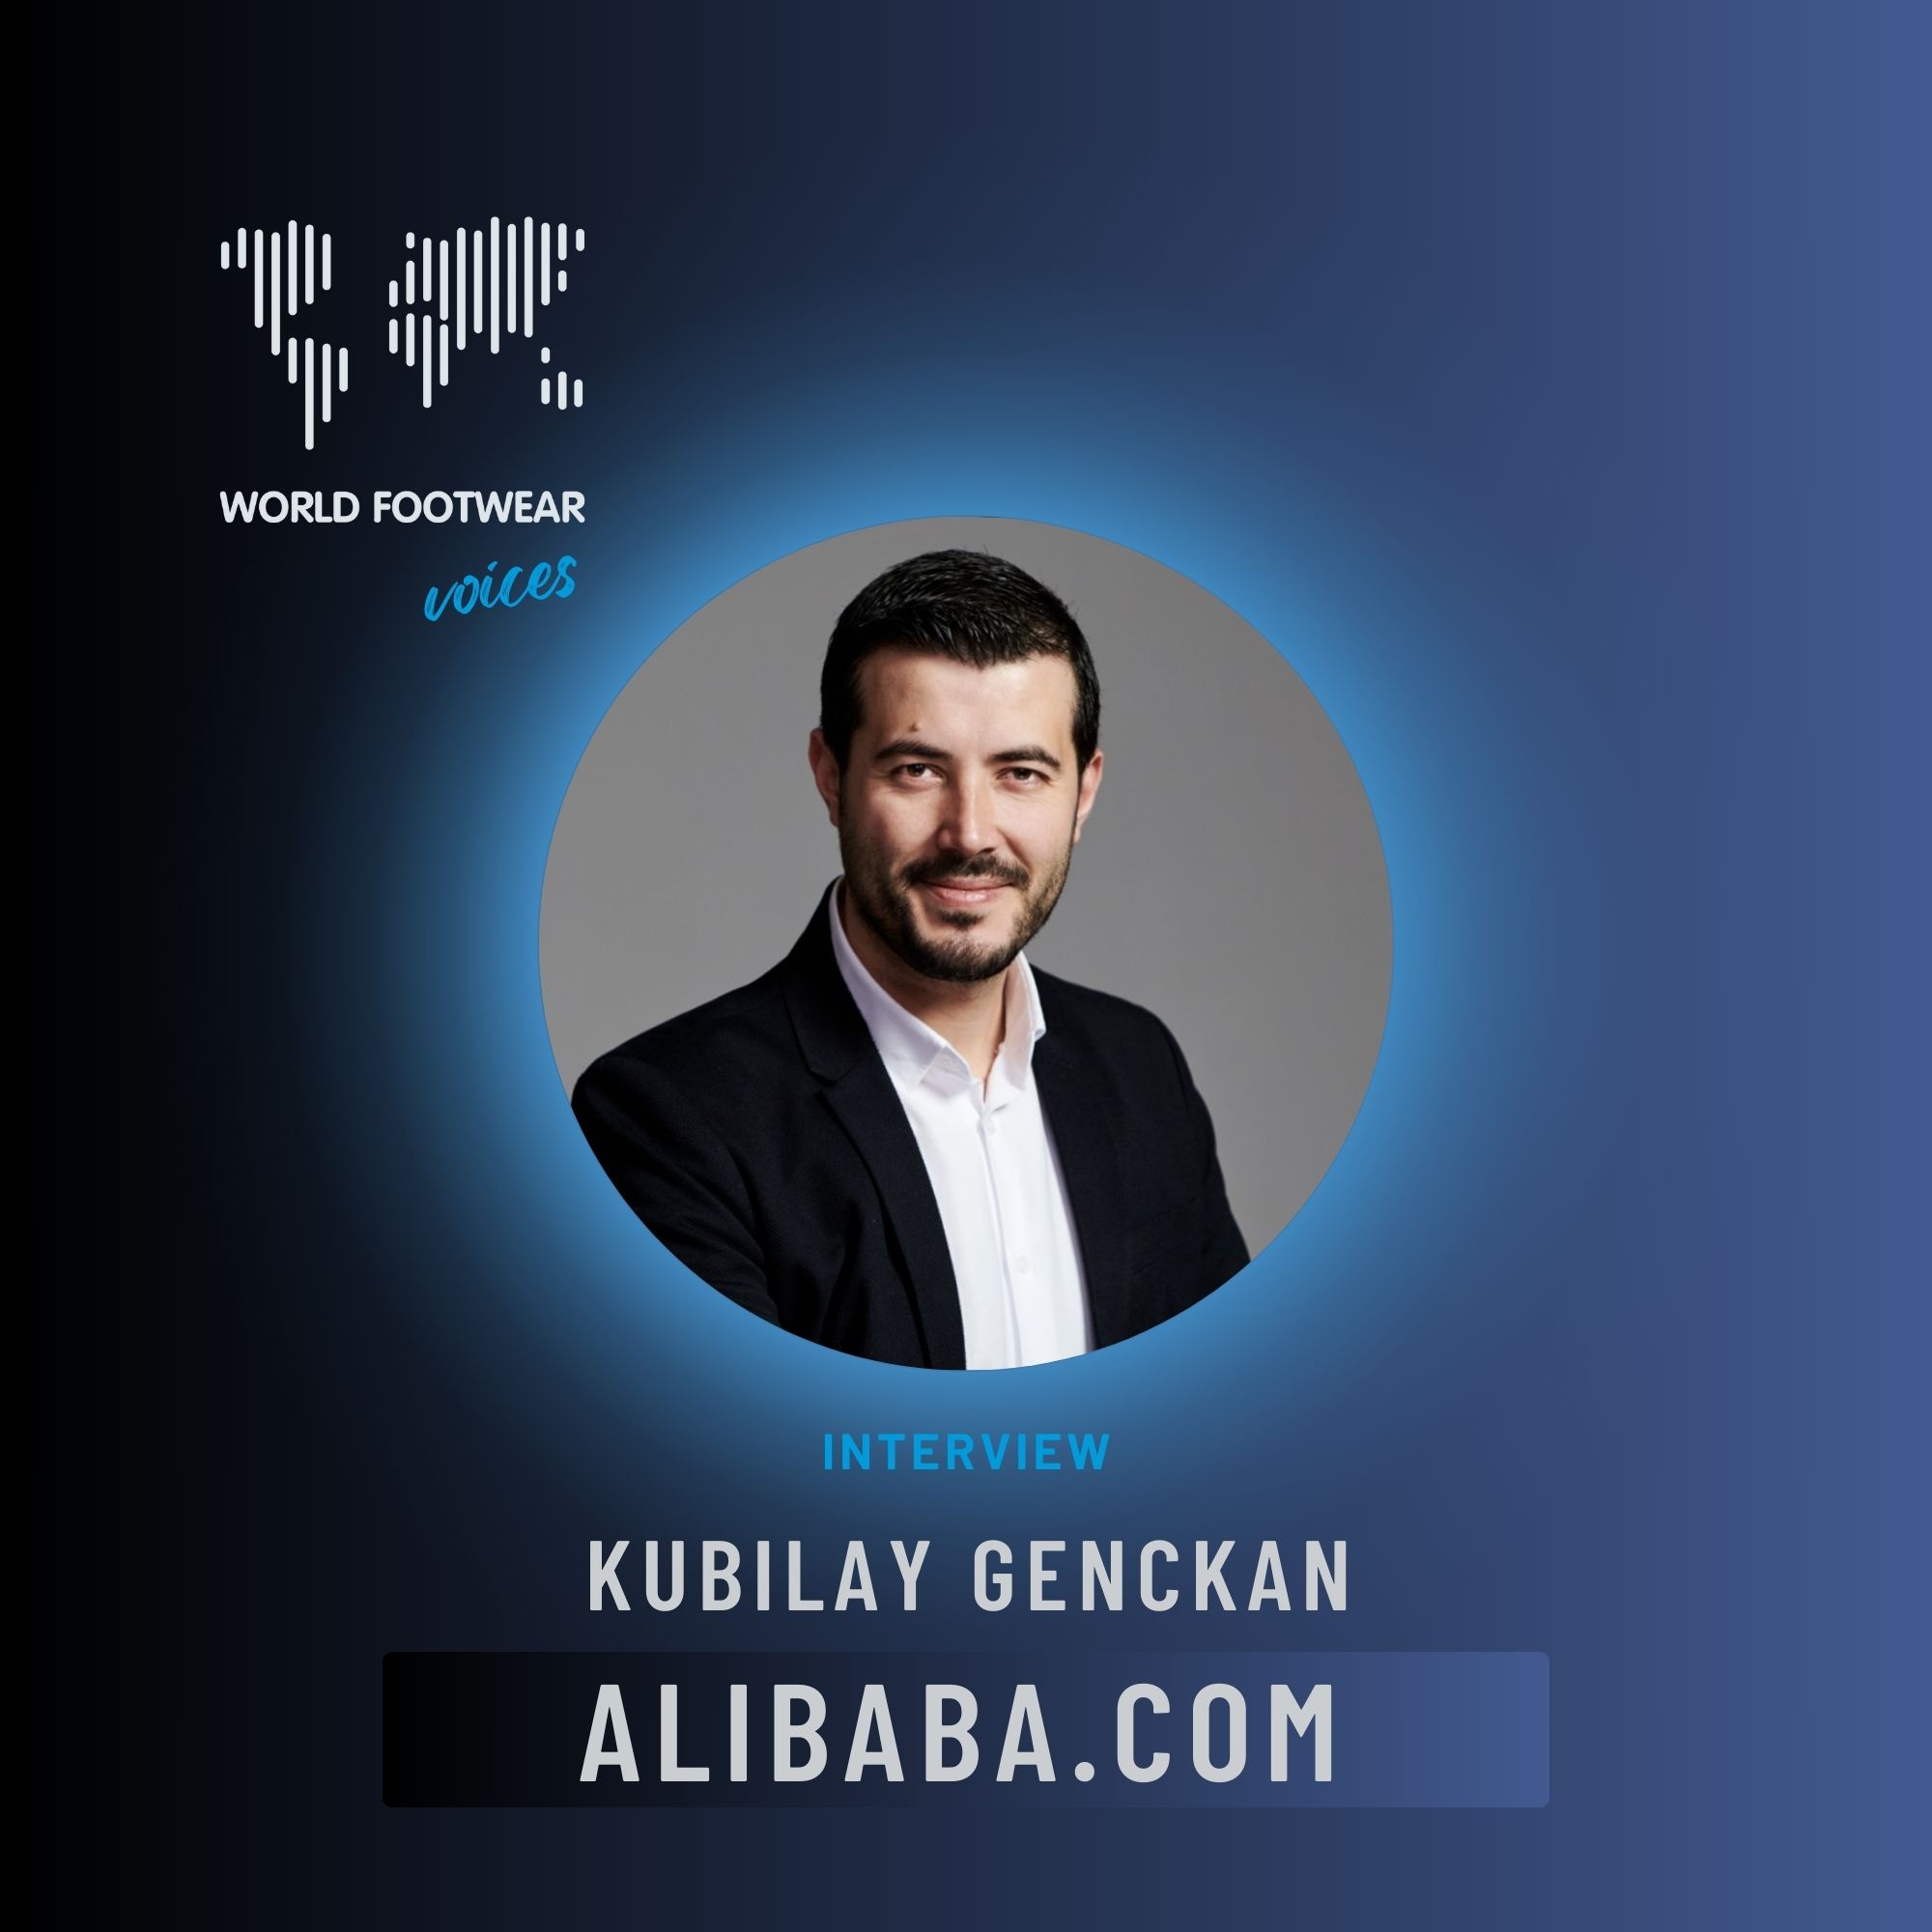 World Footwear Voices: interview with Kubilay Genckan from Alibaba.com